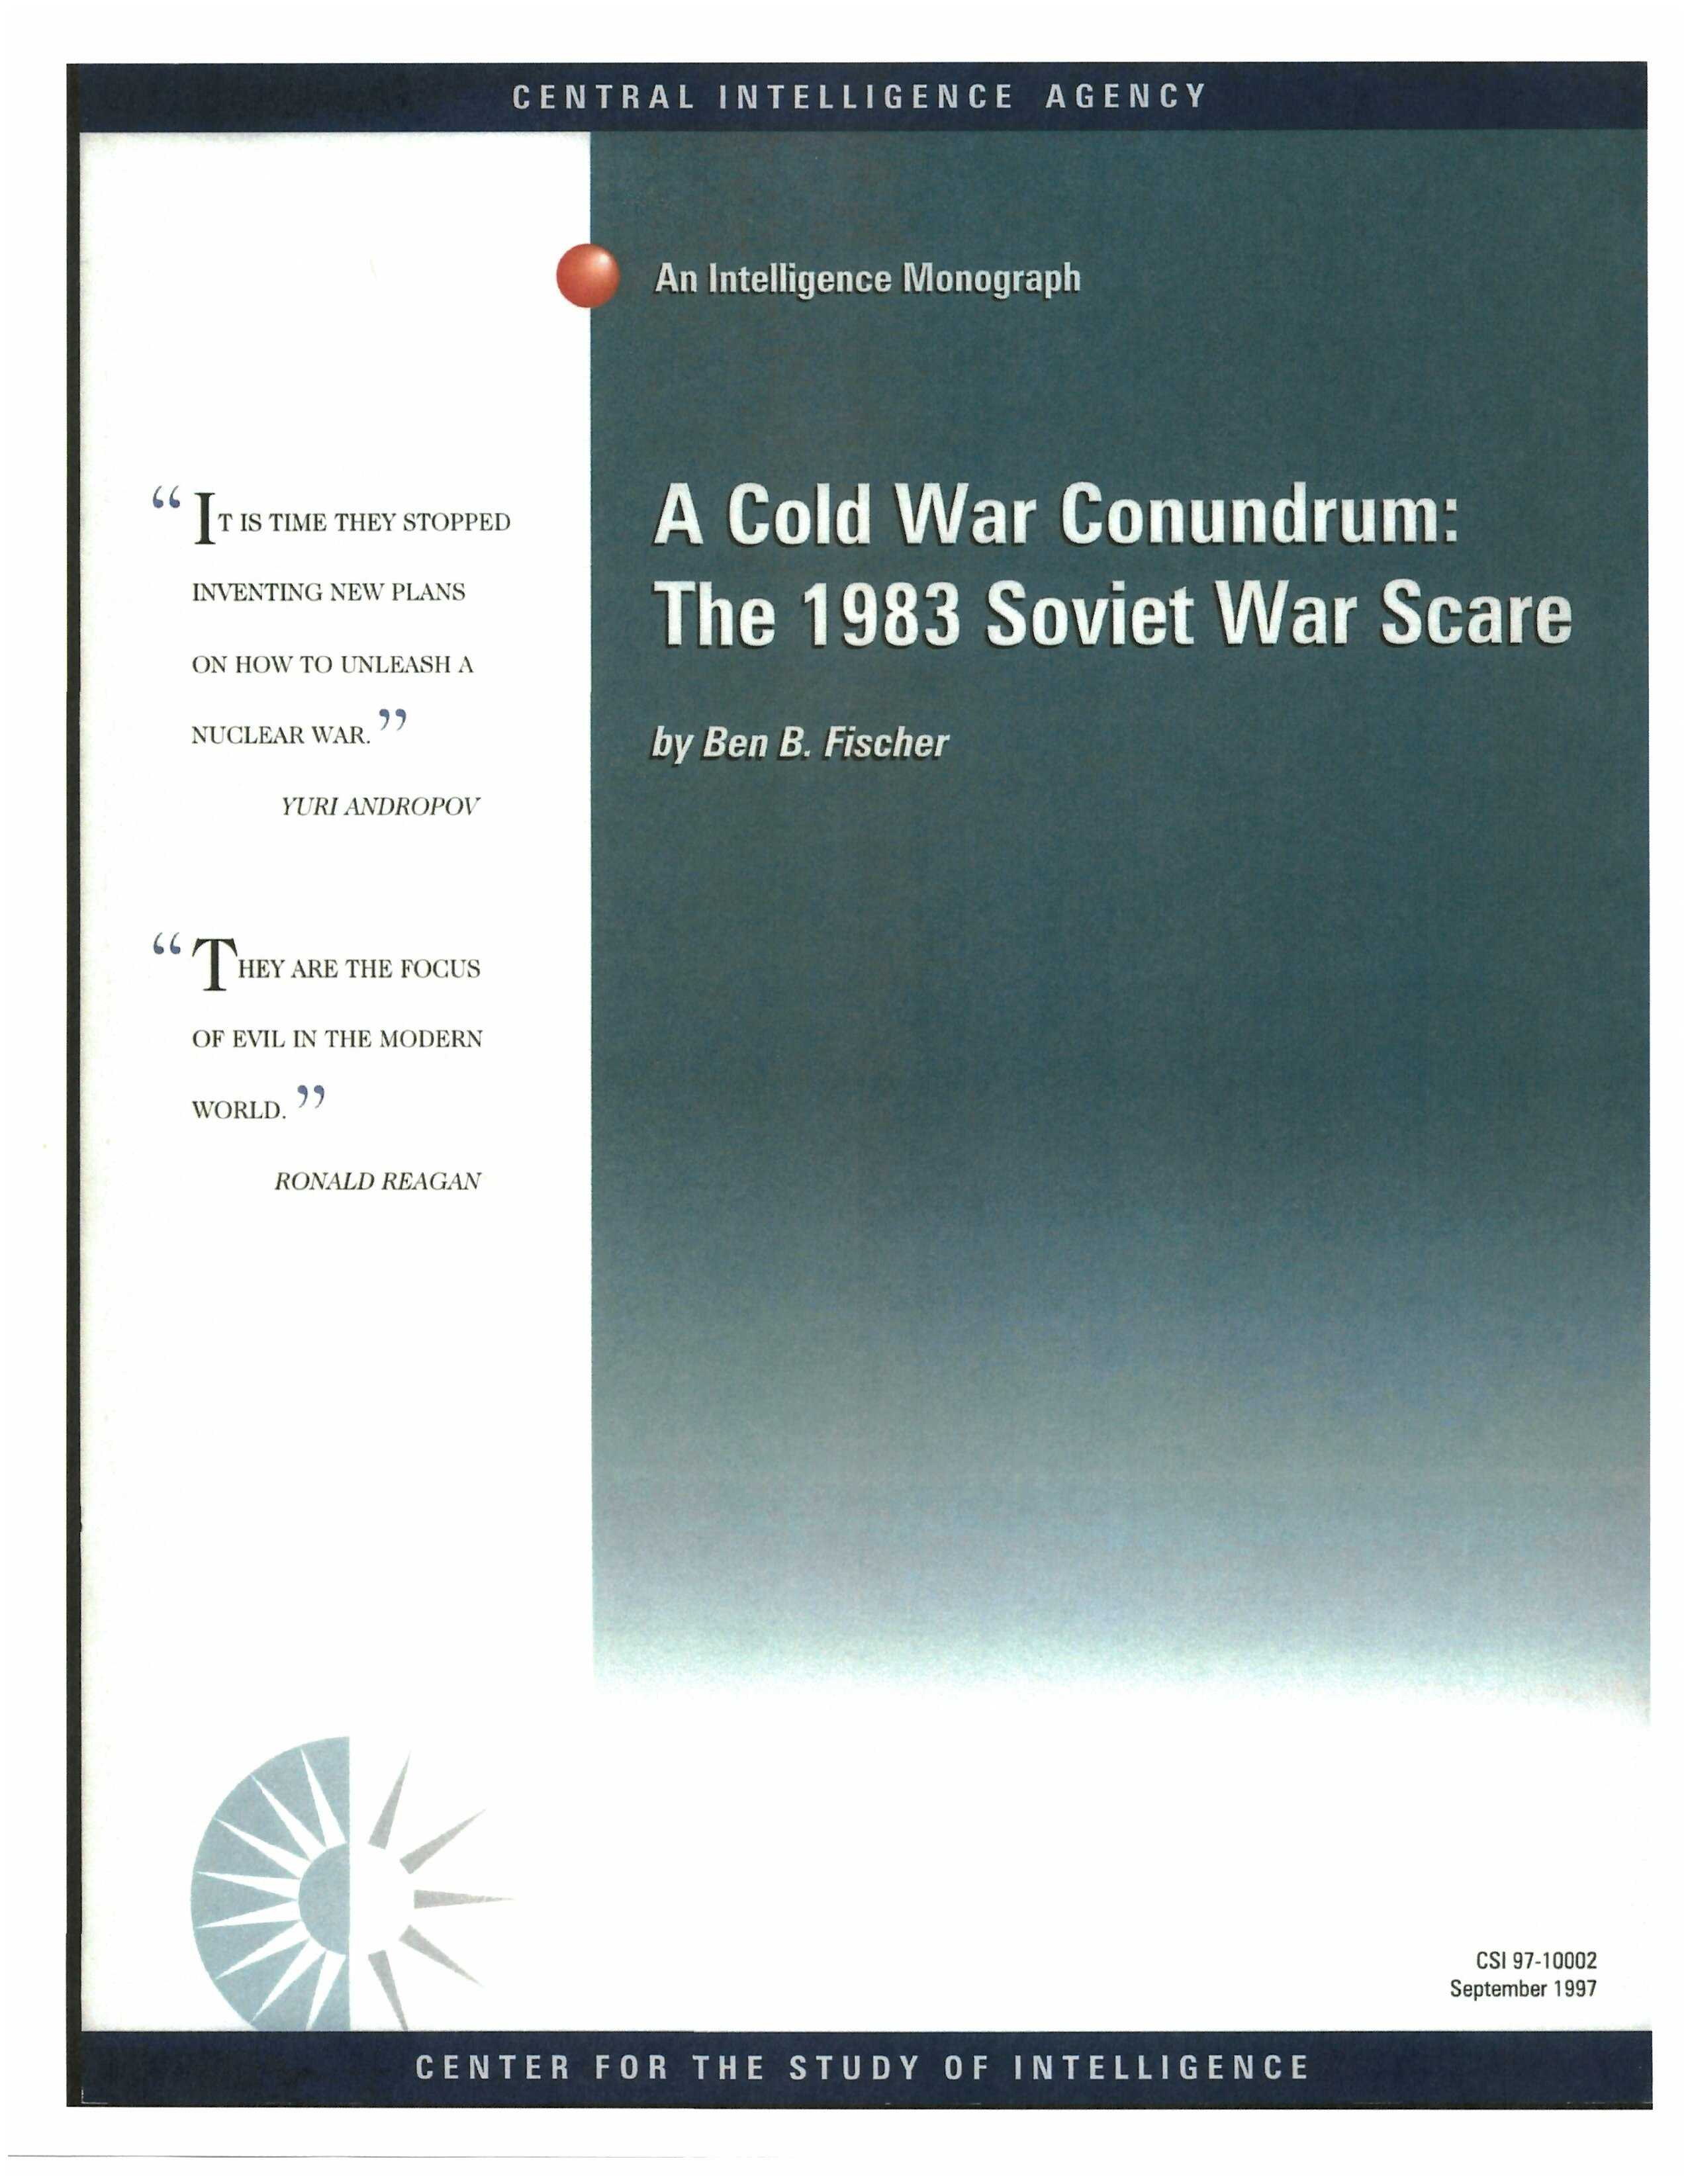 Simple cover showing title "A Cold War Conundrum: The 1983 Soviet War Scare" by Ben B. Fischer with quotes from Yuri Andropov and Ronald Reagan